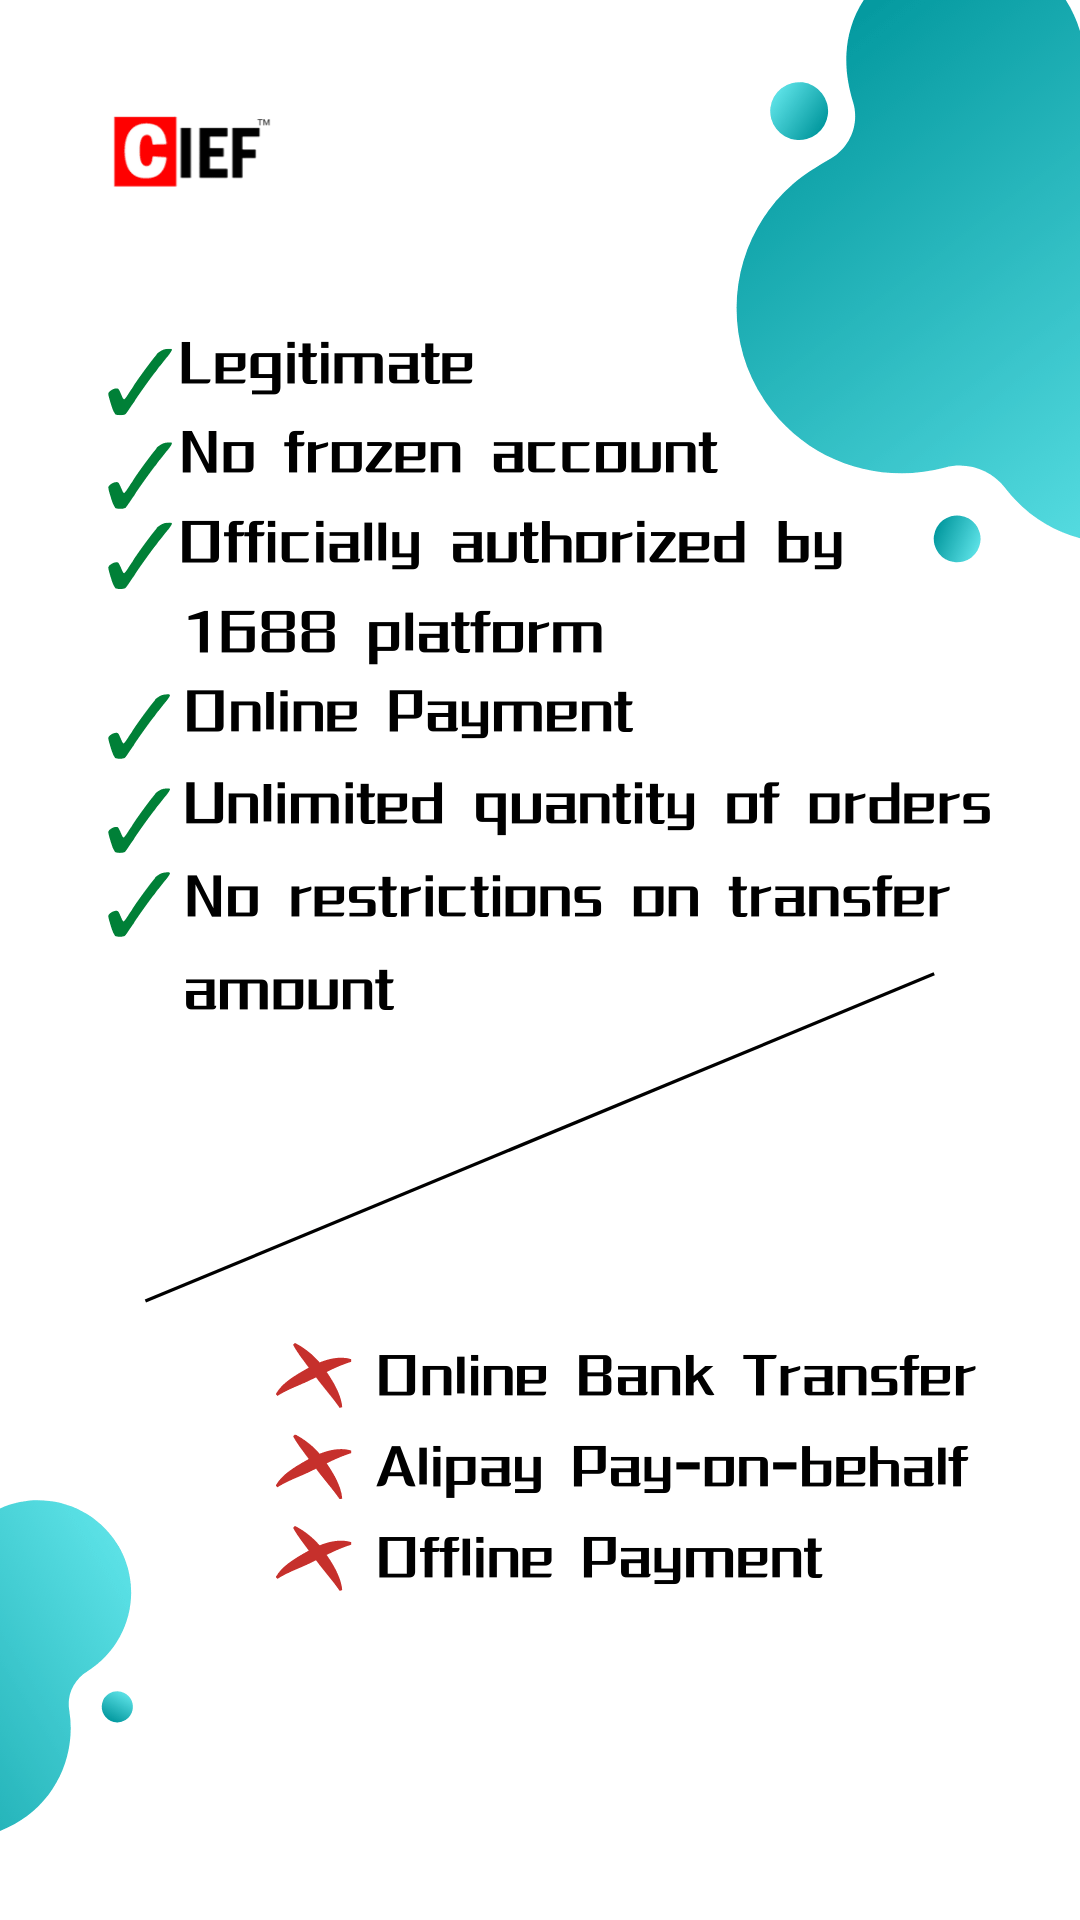 the features of the 1688 payment